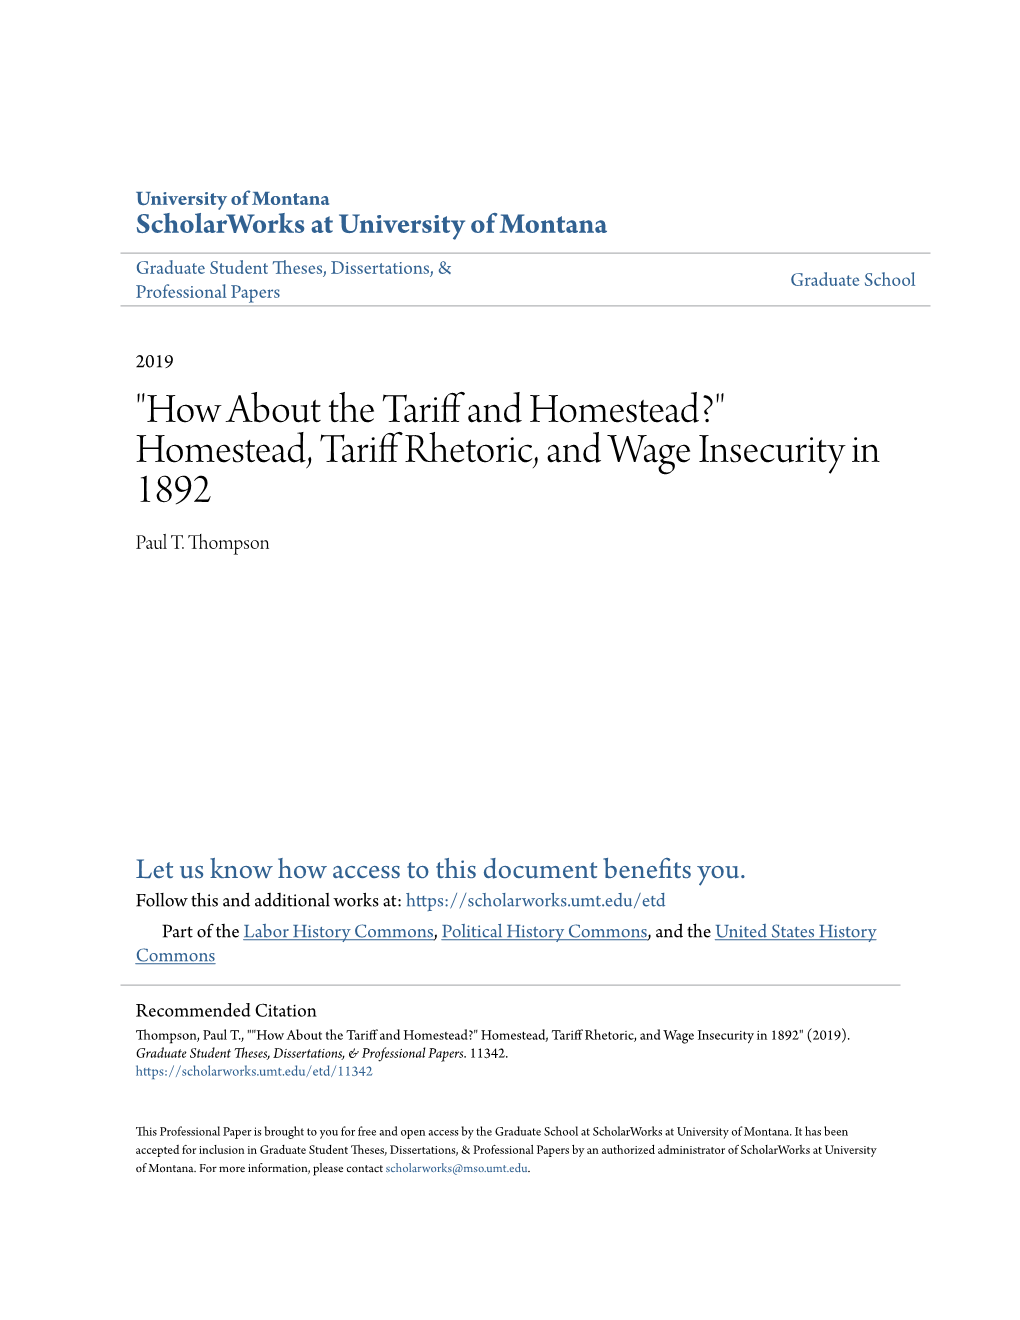 Homestead, Tariff Rhetoric, and Wage Insecurity in 1892 Paul T